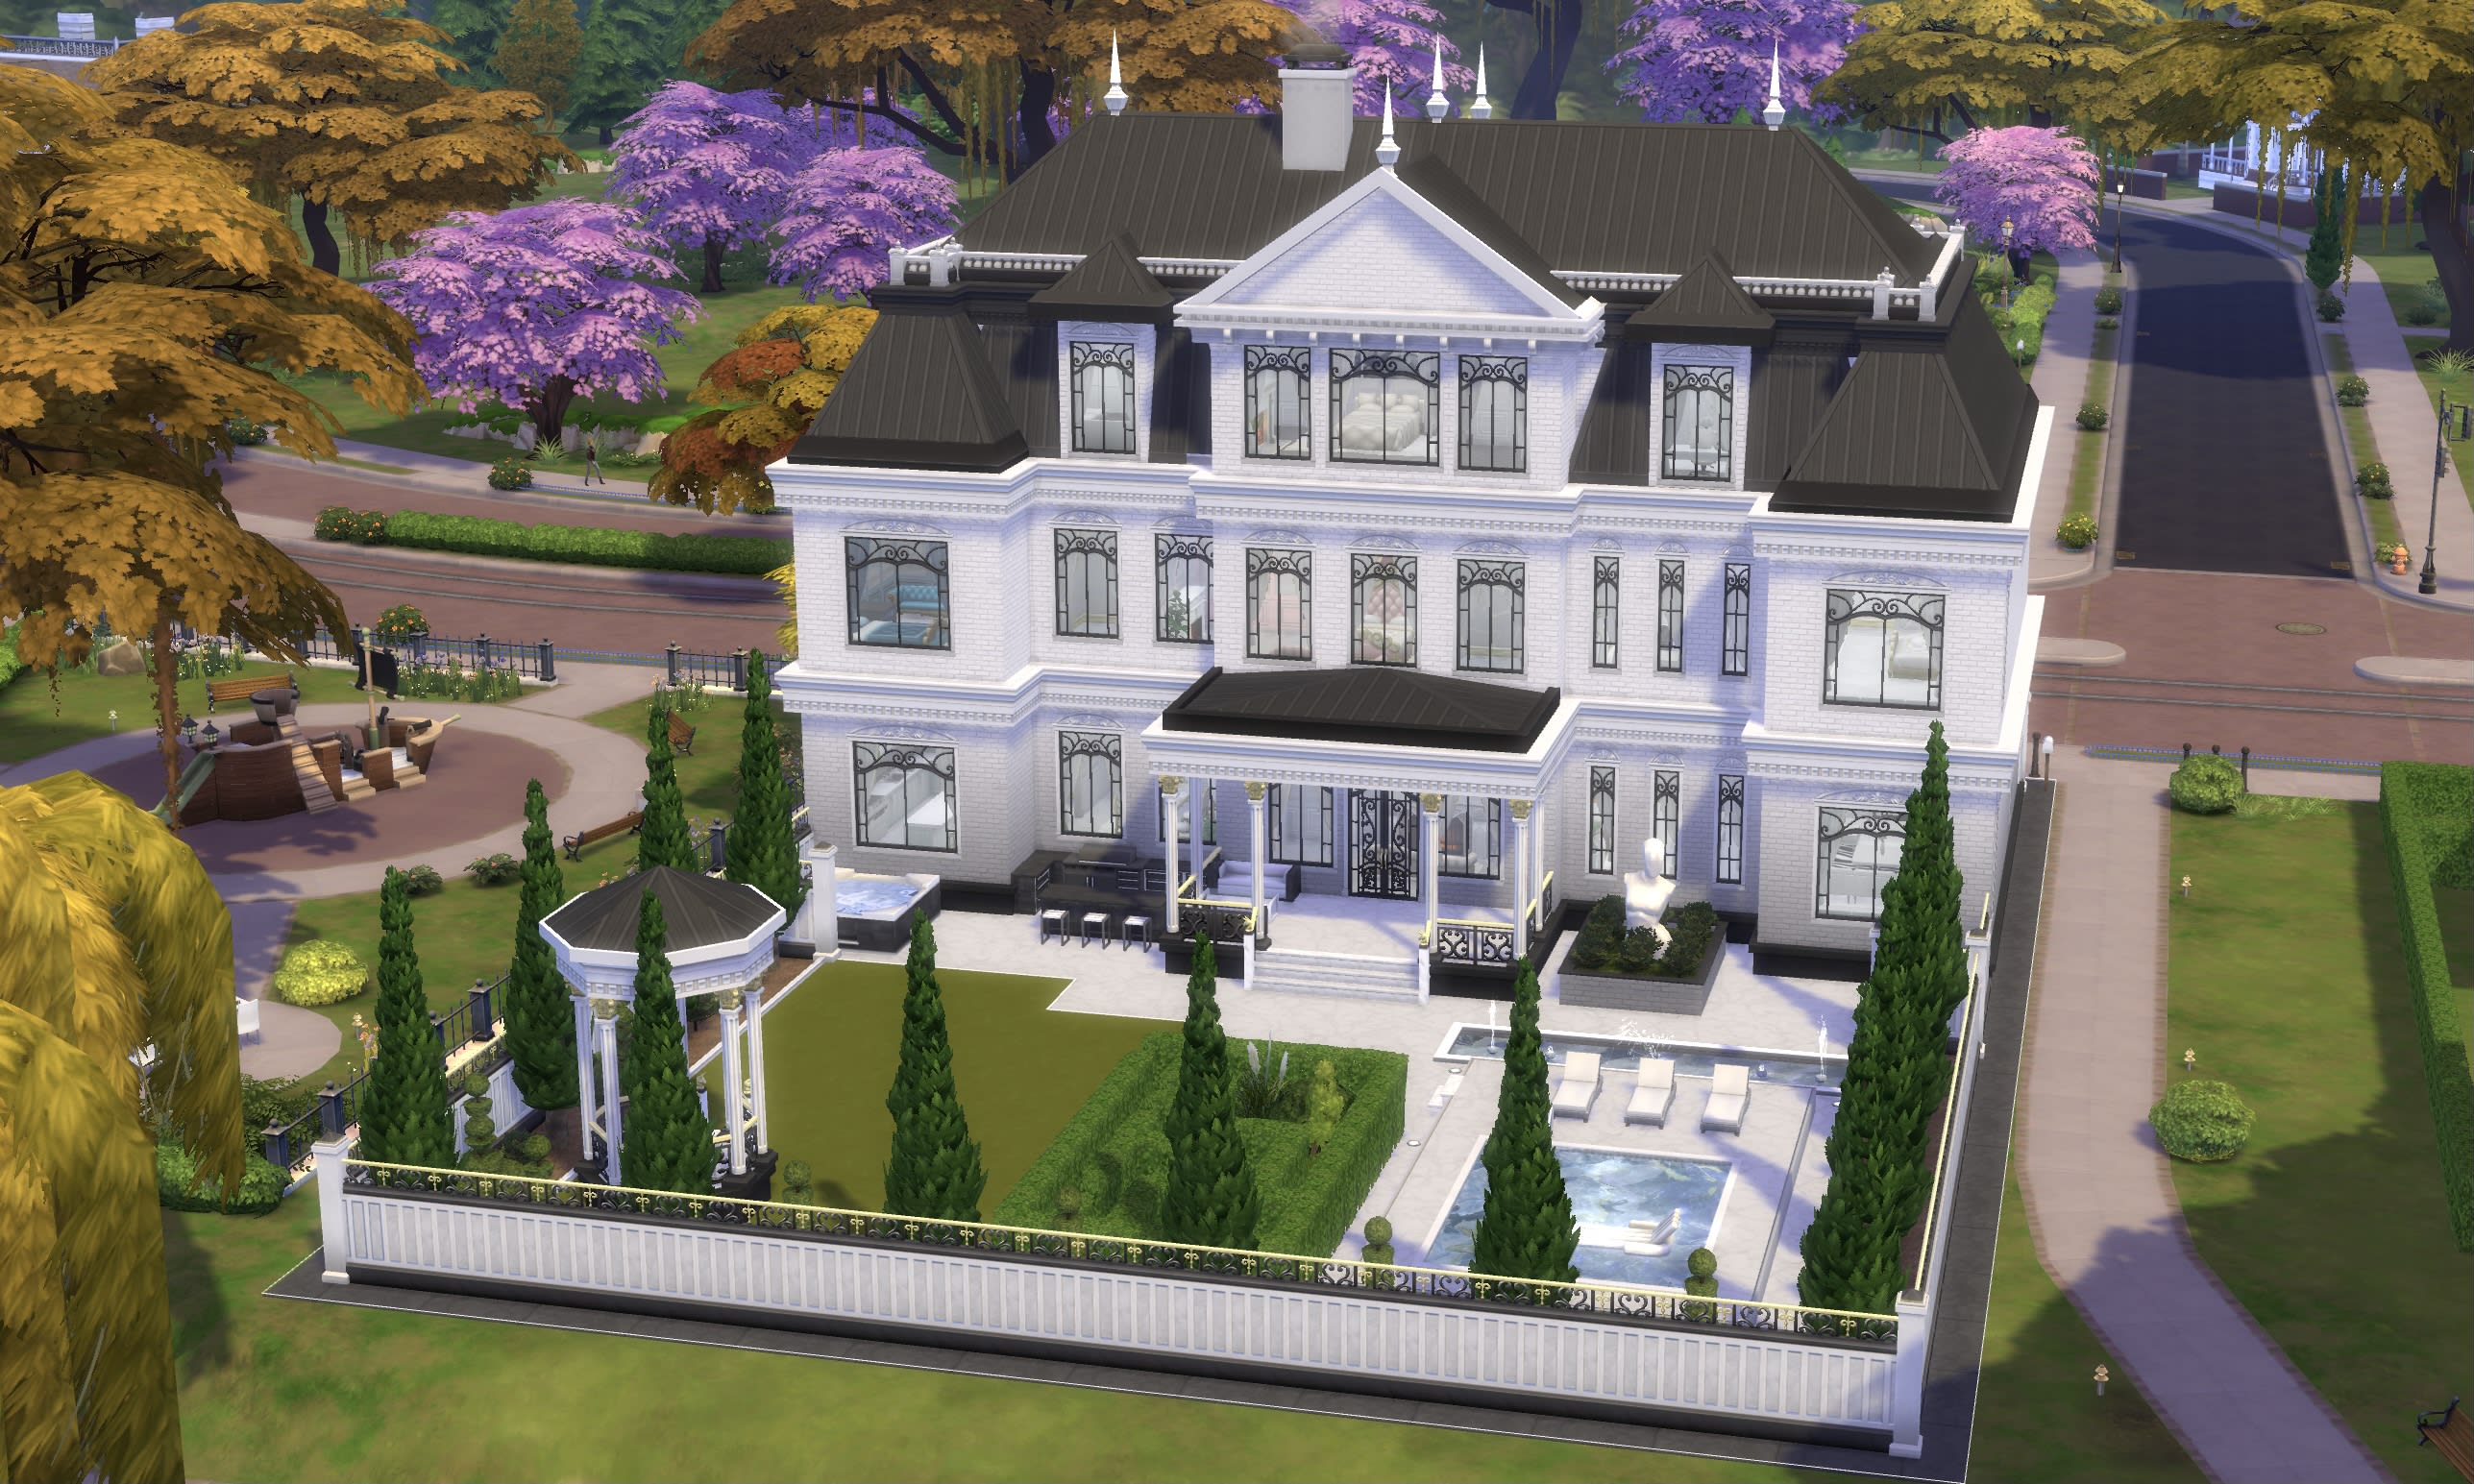 Build You A Playable House Or Lot In The Sims 4 By Thesims4Builder | Fiverr